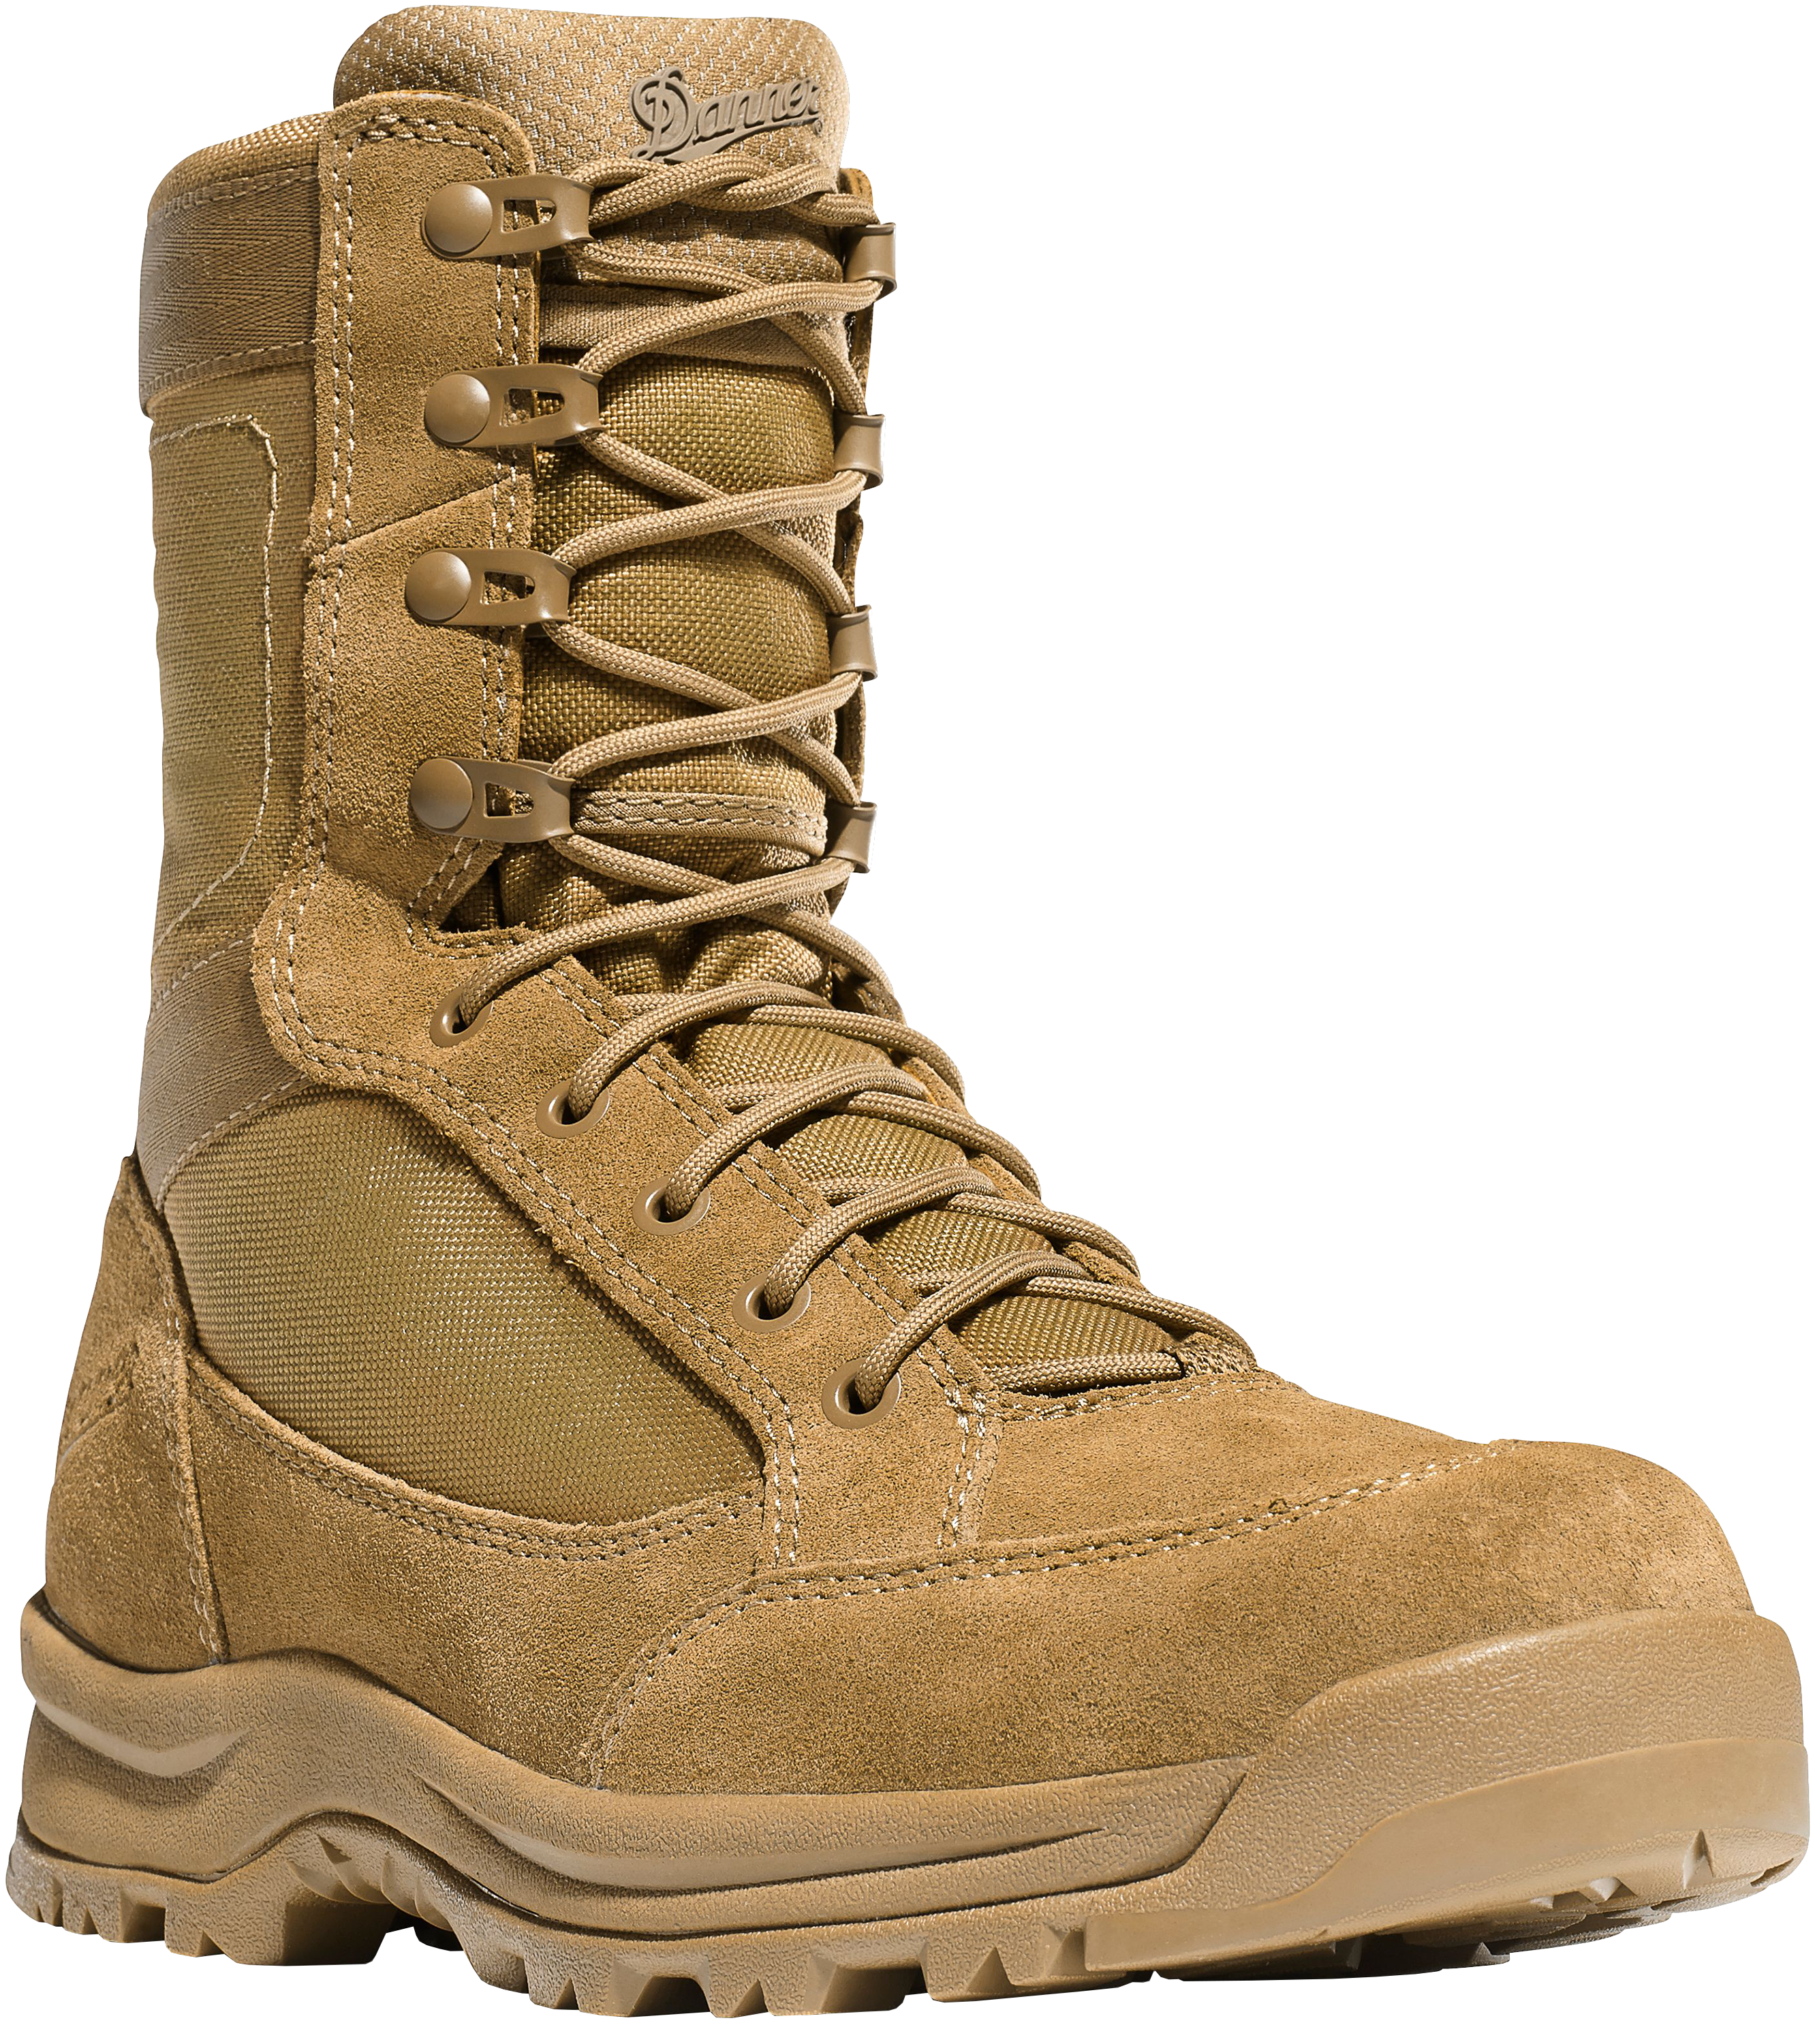 Danner Tanicus 8"" Tactical Duty Boots for Men